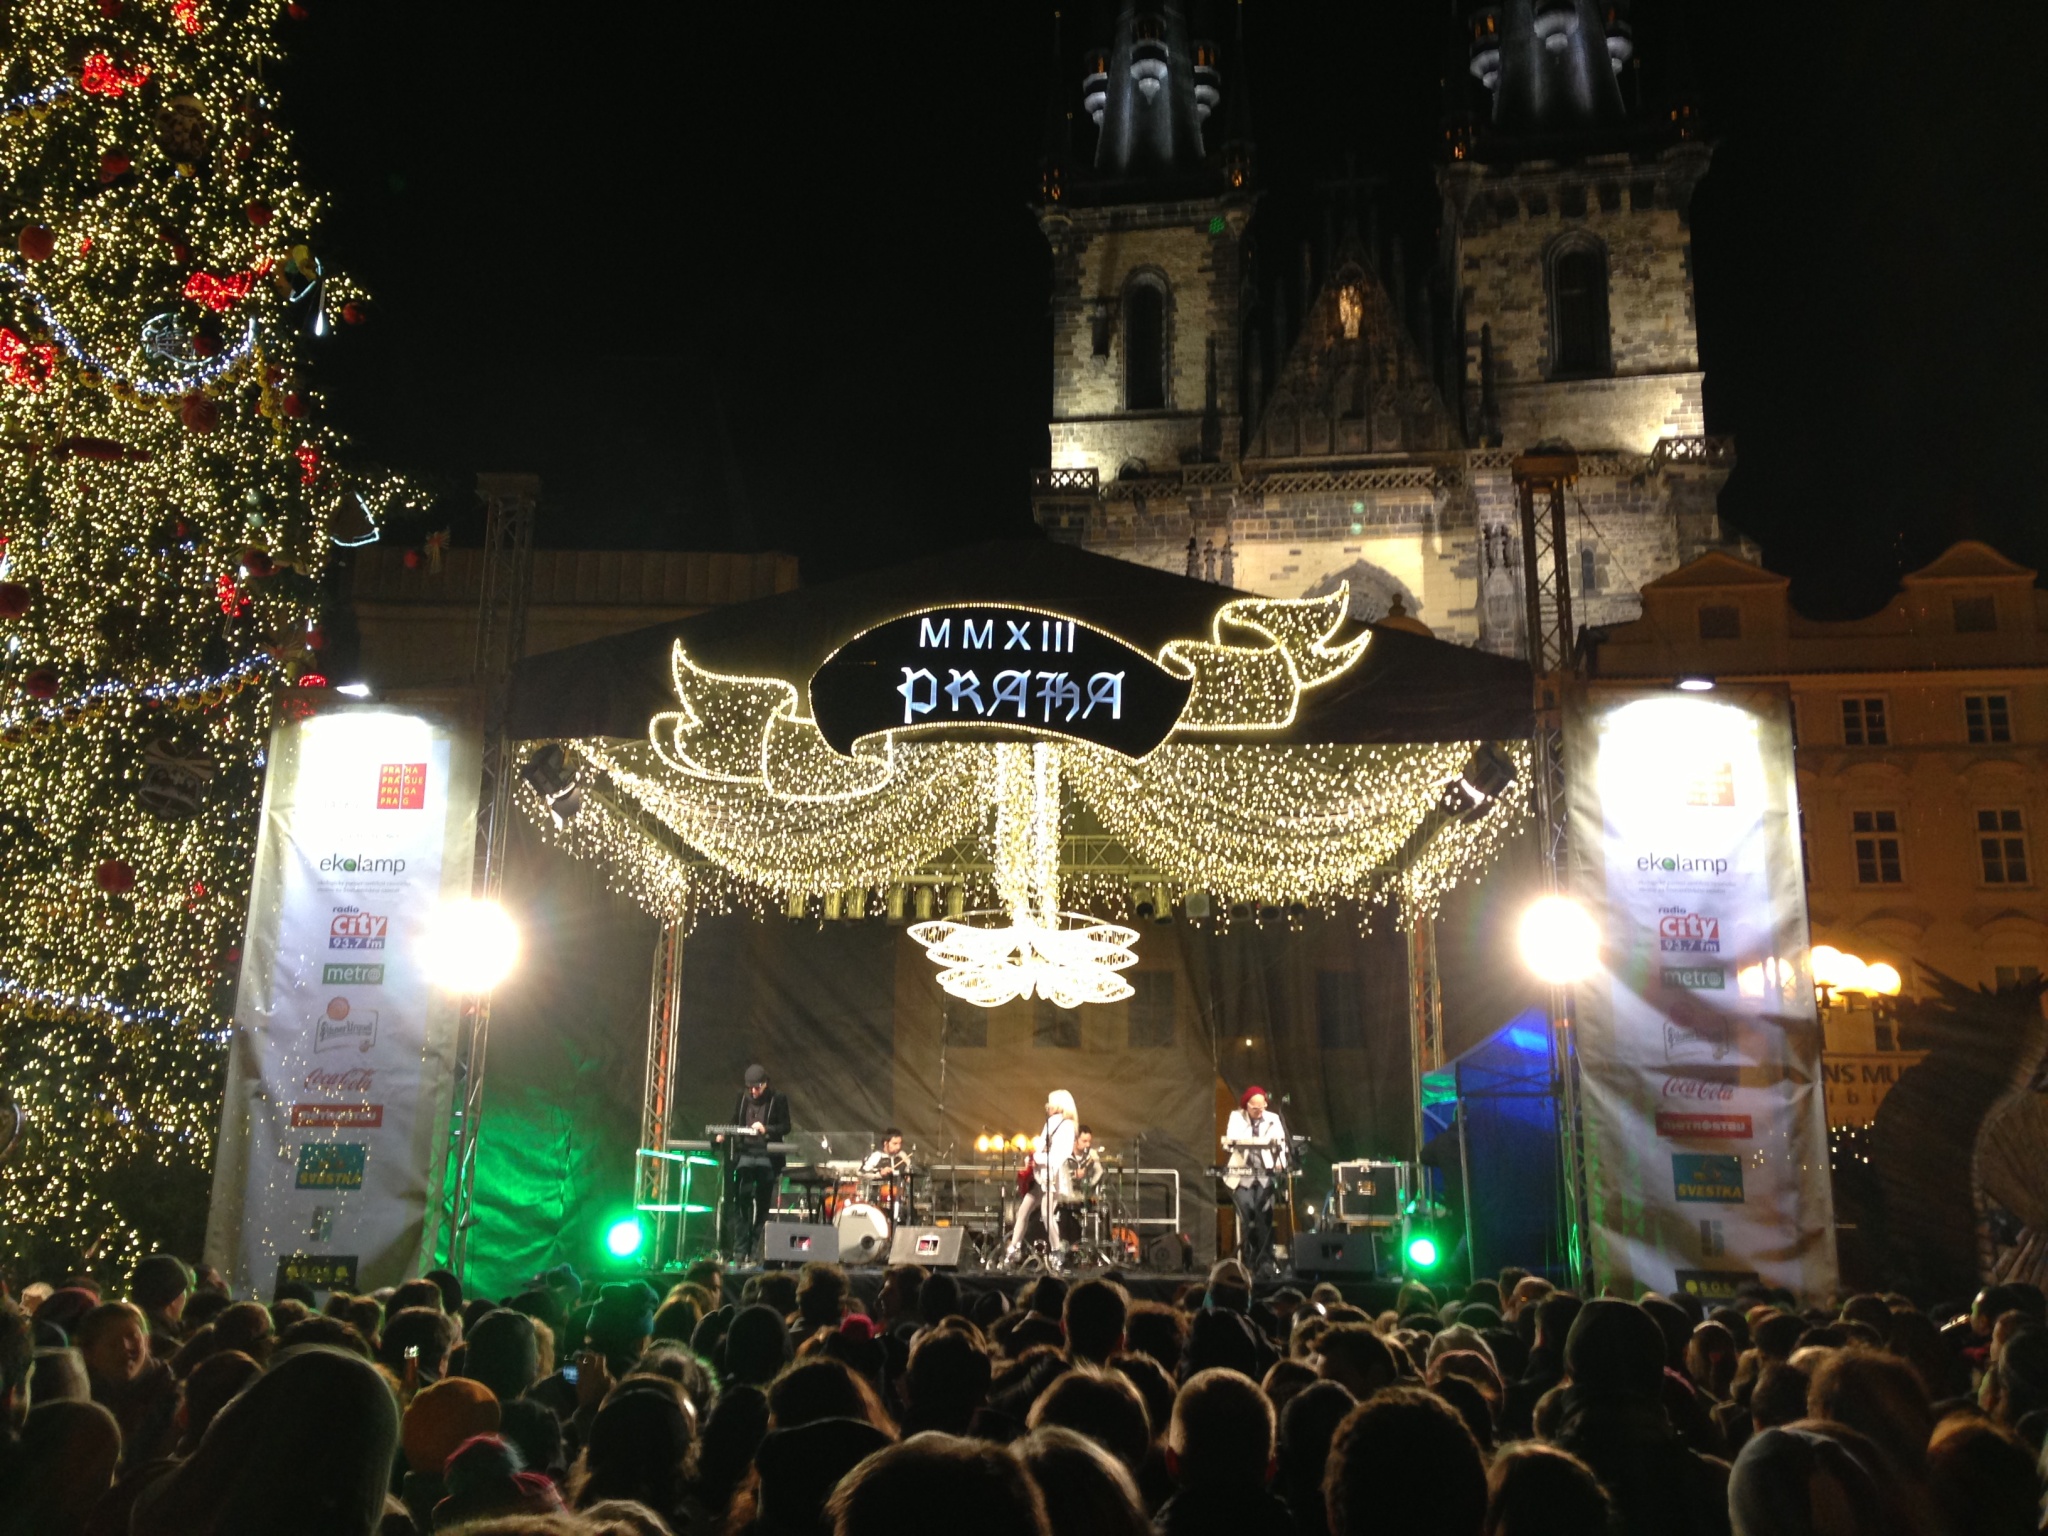 Cartonnage, one of the Czech Republic's most well-known electronic bands, plays in Prague's Old Town Square on New Year's Eve.